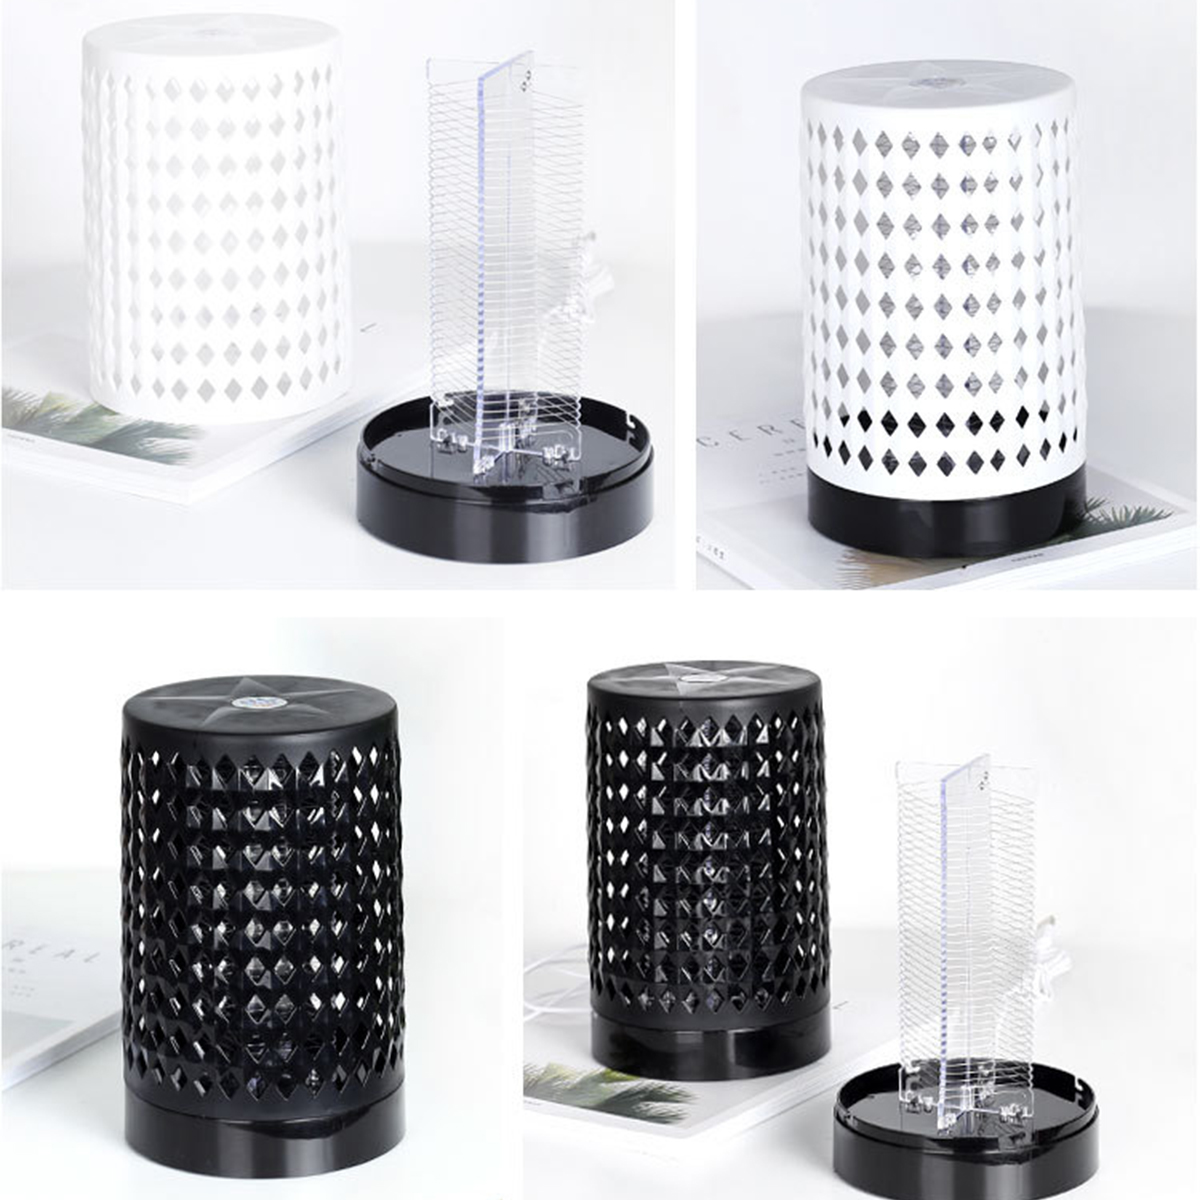 USB-Electric-Shock-Type-Mosquito-Killer-Lamp-LED-Light-Trap-Fly-Bug-Pest-Insect-Zapper-1487573-9